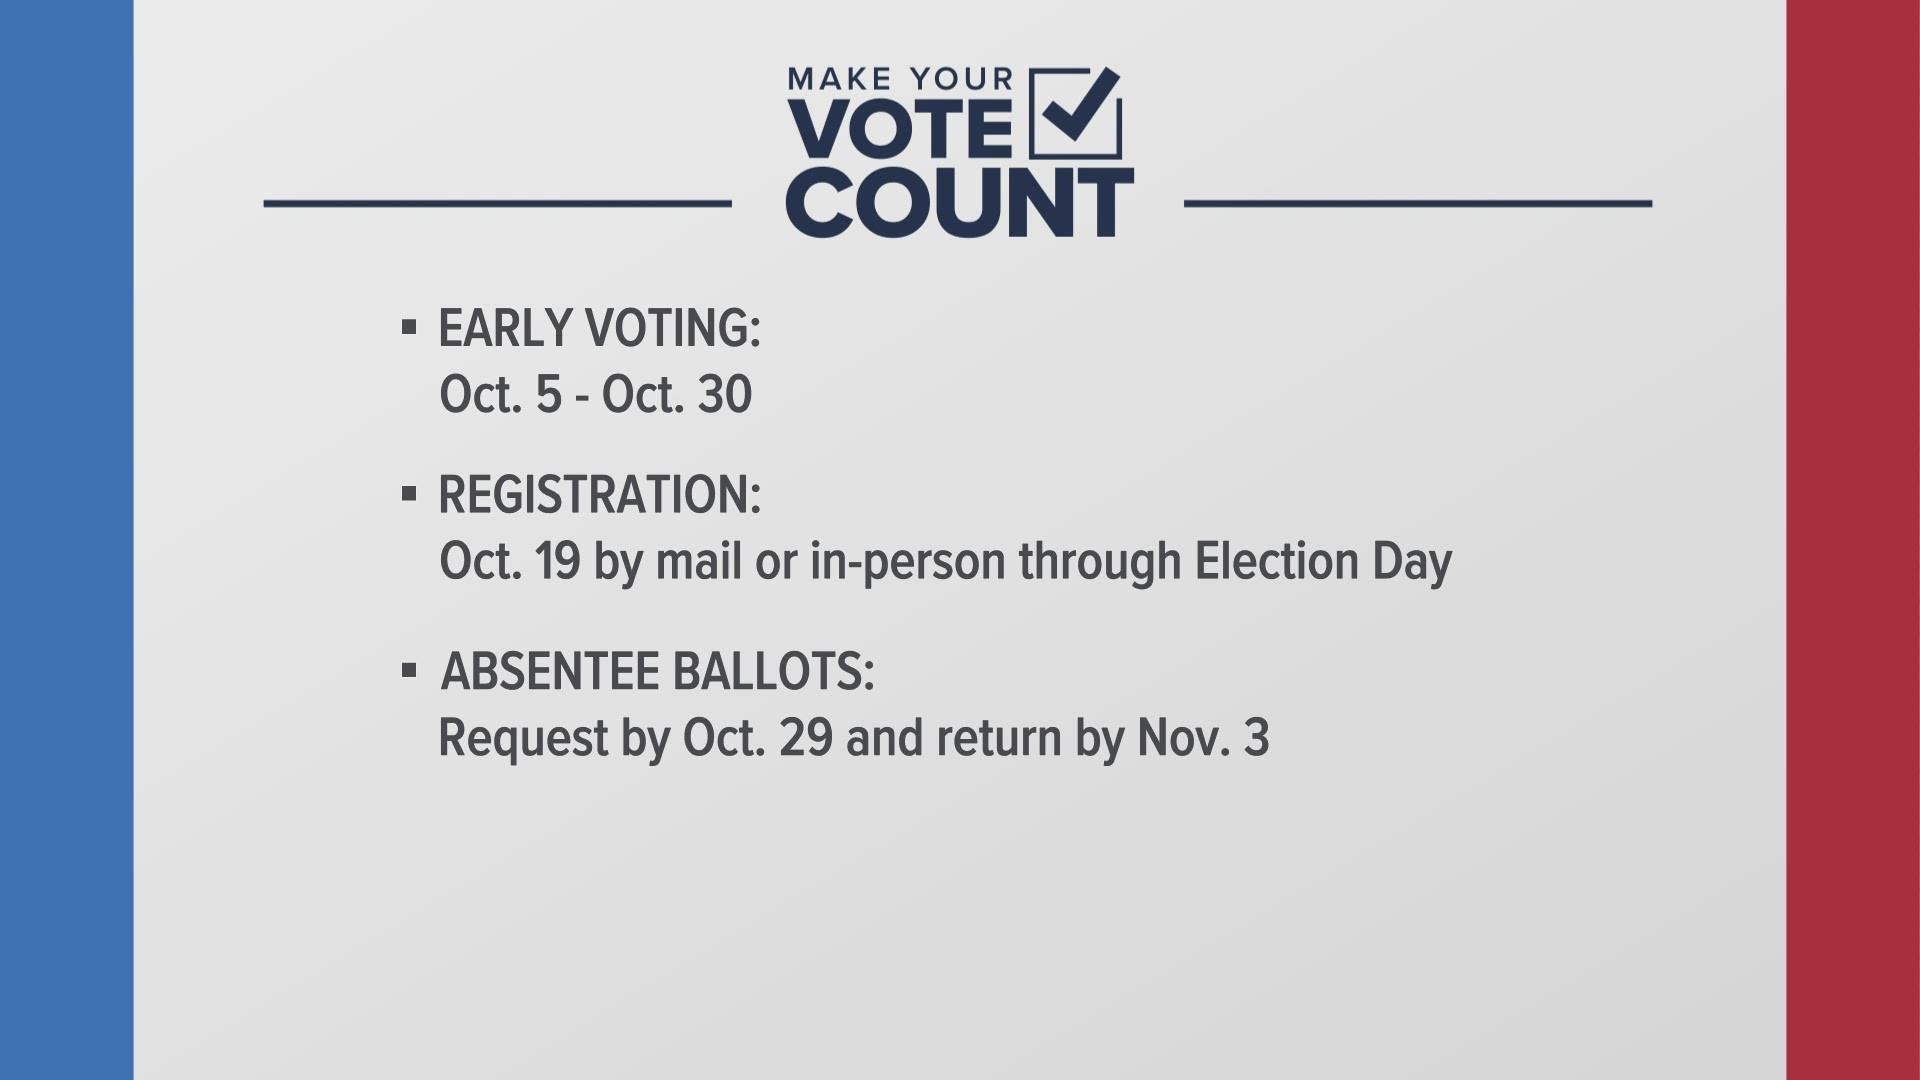 Early inperson voting begins Monday, Oct. 5 in Maine cities